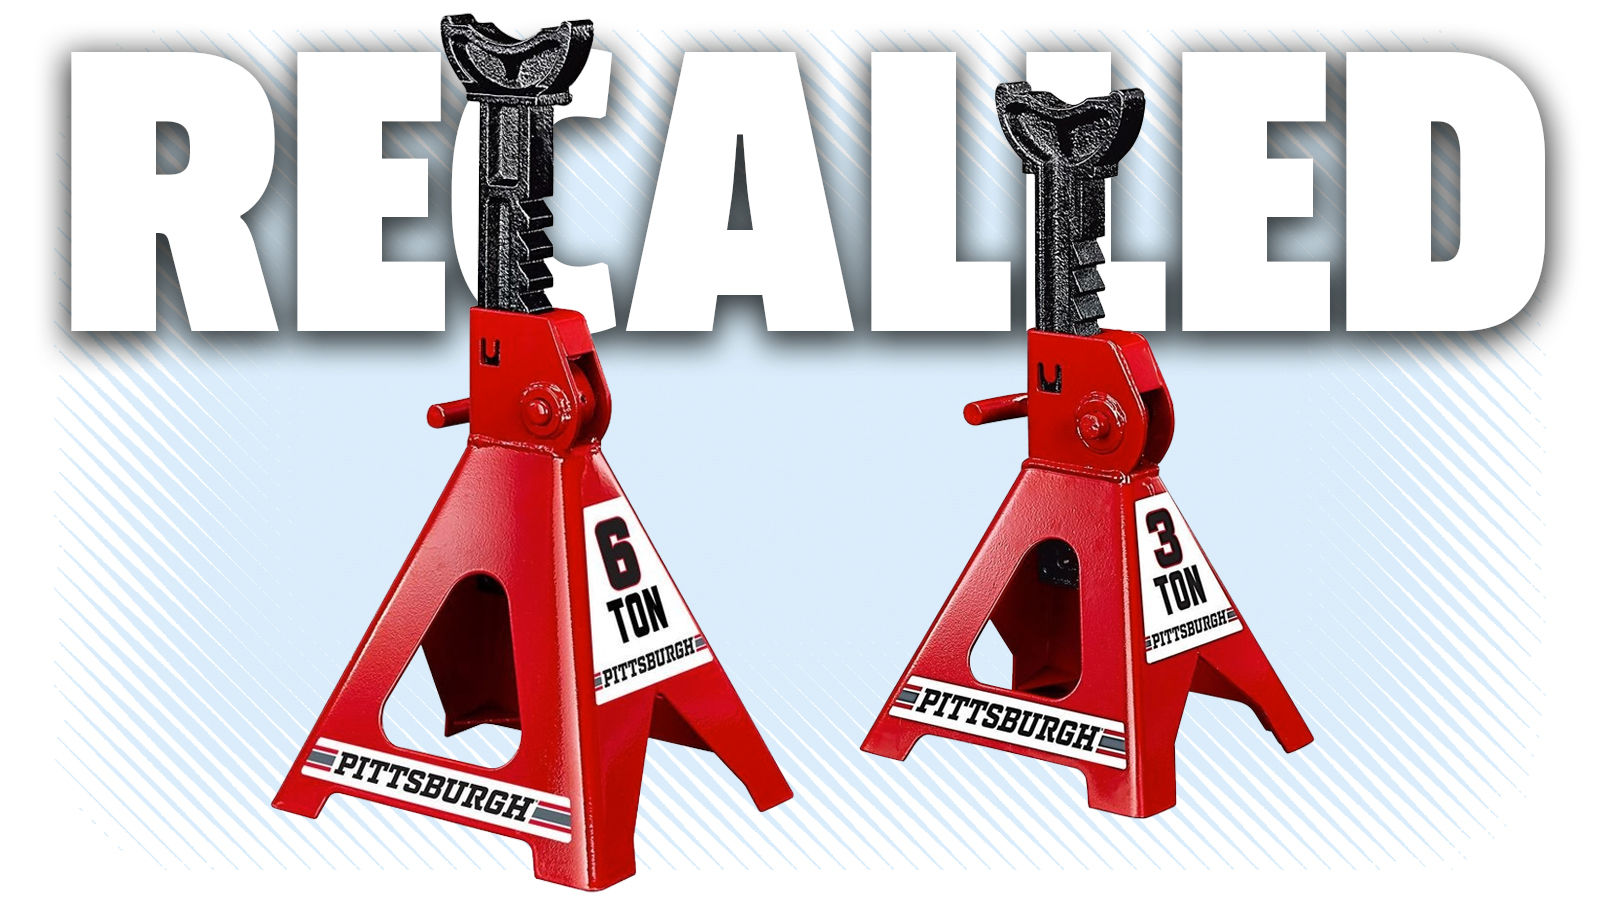 Illustration for article titled I somehow avoided the Harbor Freight jack stand recall?